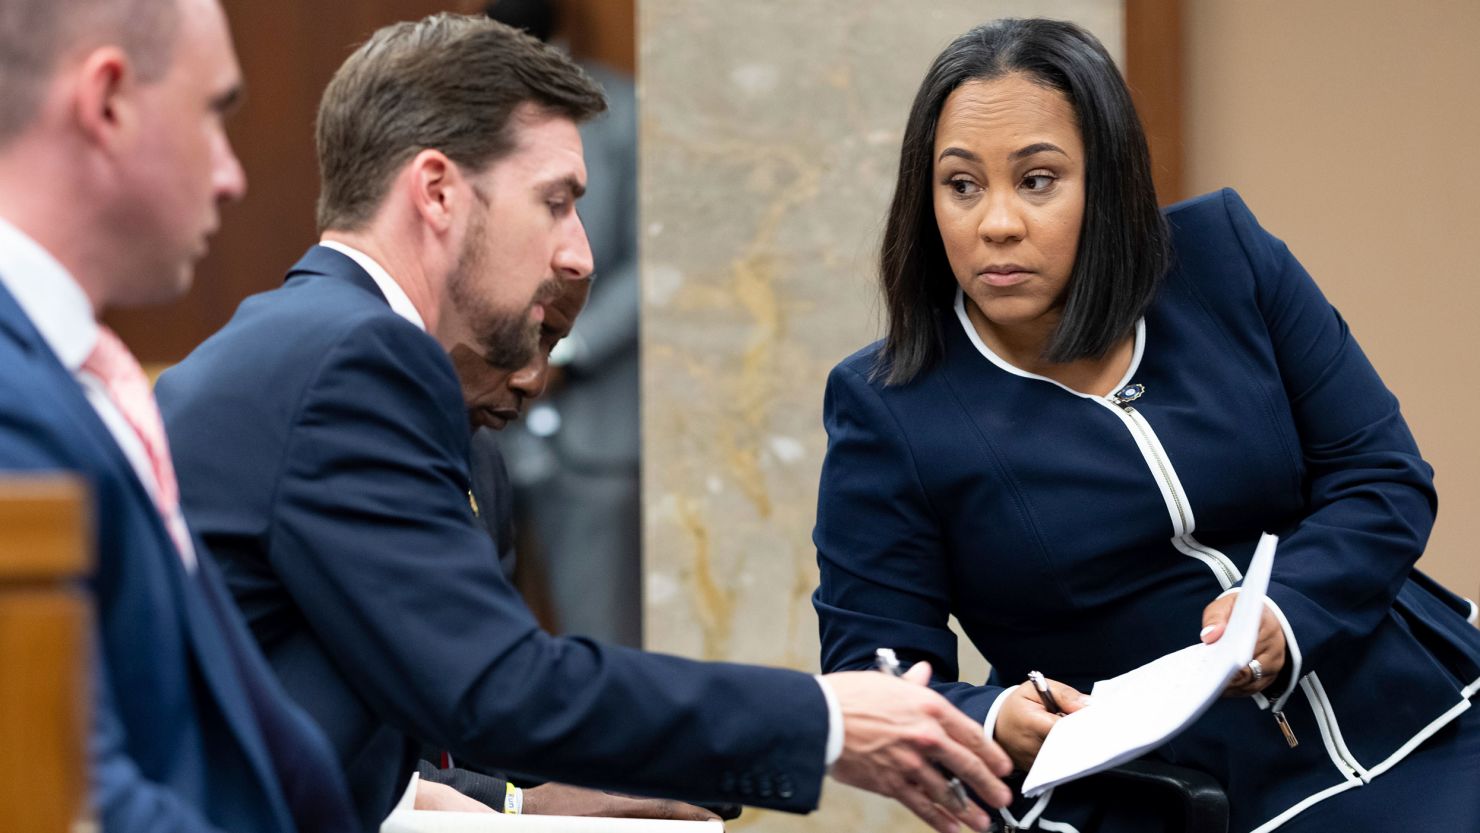 Fulton County District Attorney Fani Willis, right, talks with a member of her team during proceedings to seat a special purpose grand jury in Fulton County, Georgia, on Monday, May 2, 2022.